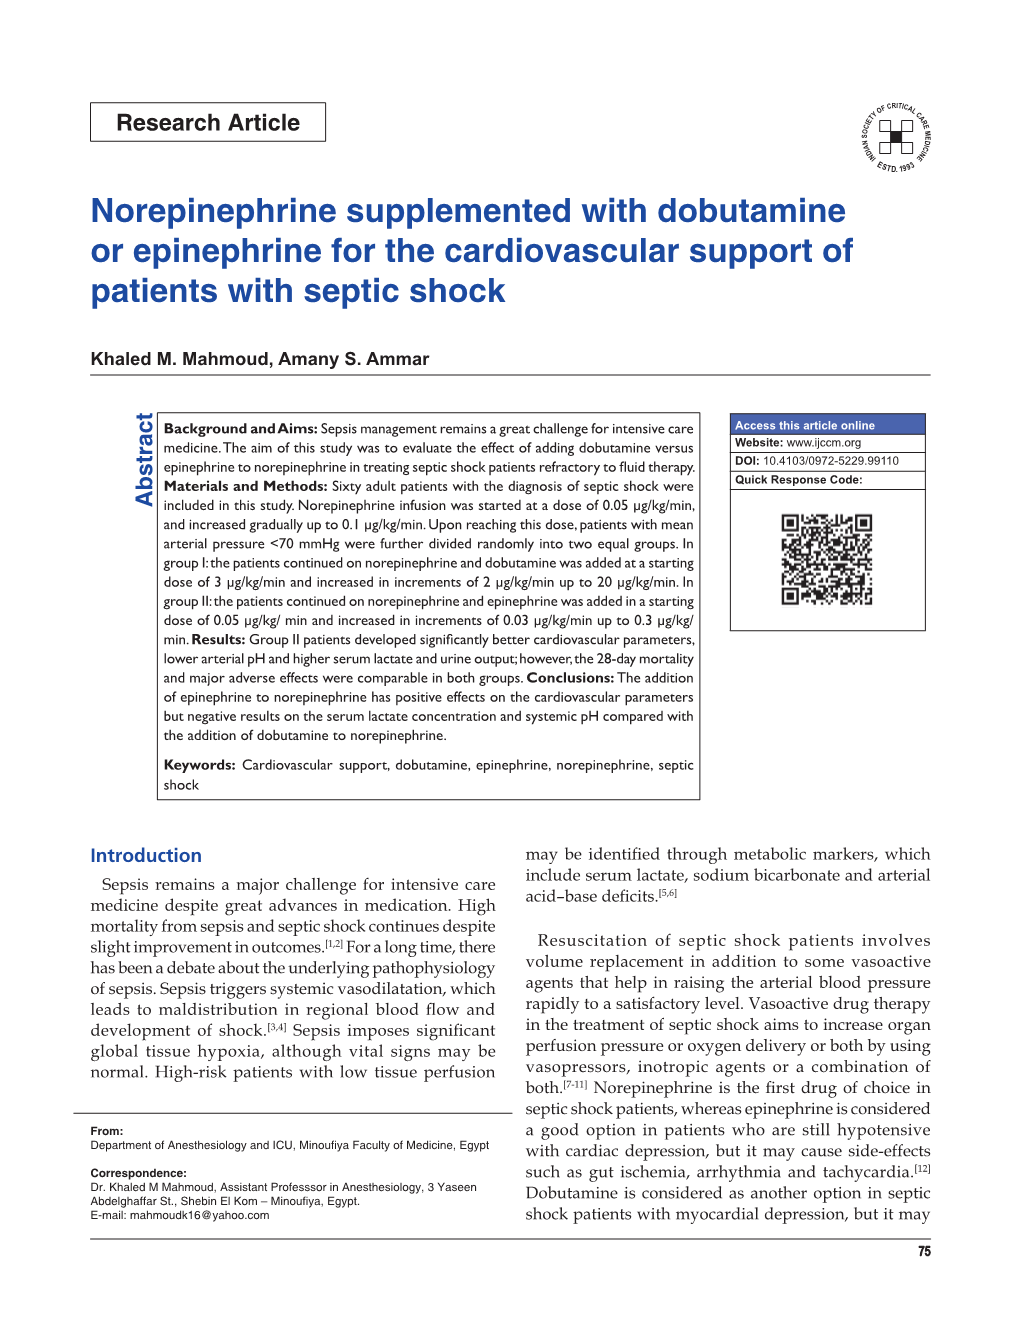 Norepinephrine Supplemented with Dobutamine Or Epinephrine for the Cardiovascular Support of Patients with Septic Shock